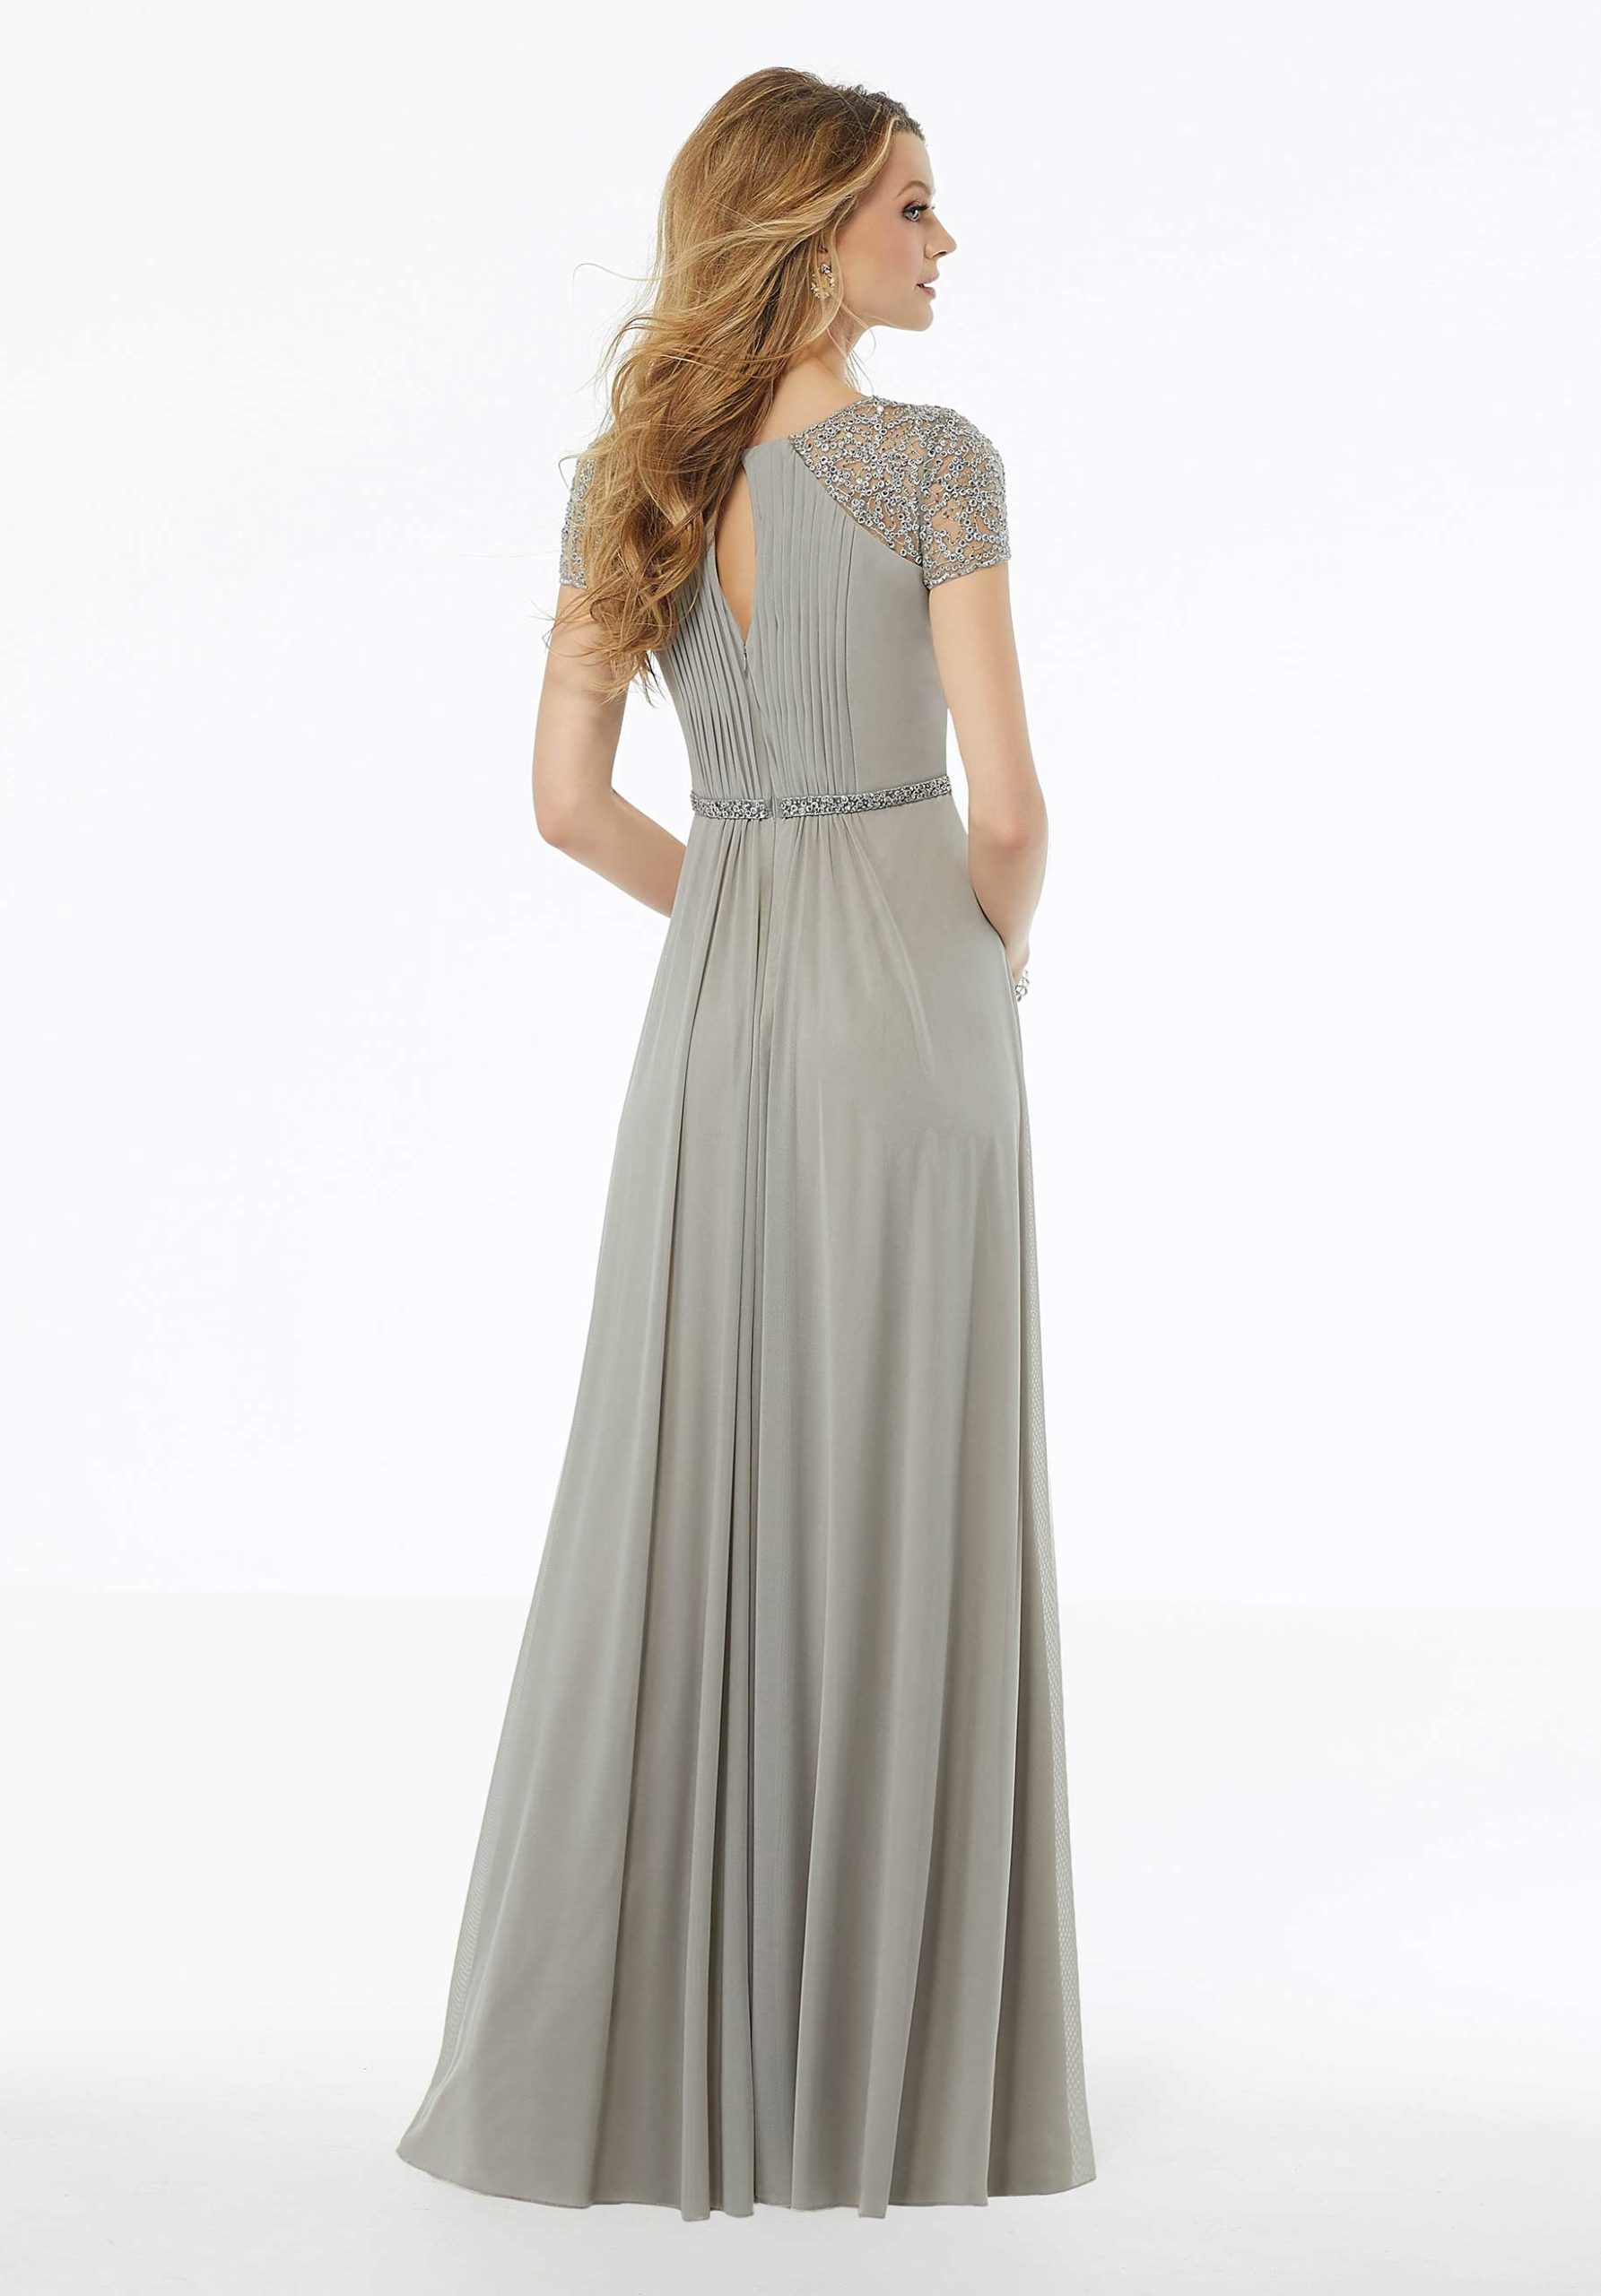 Special Occasion Dresses - One Love One Dream Bridal